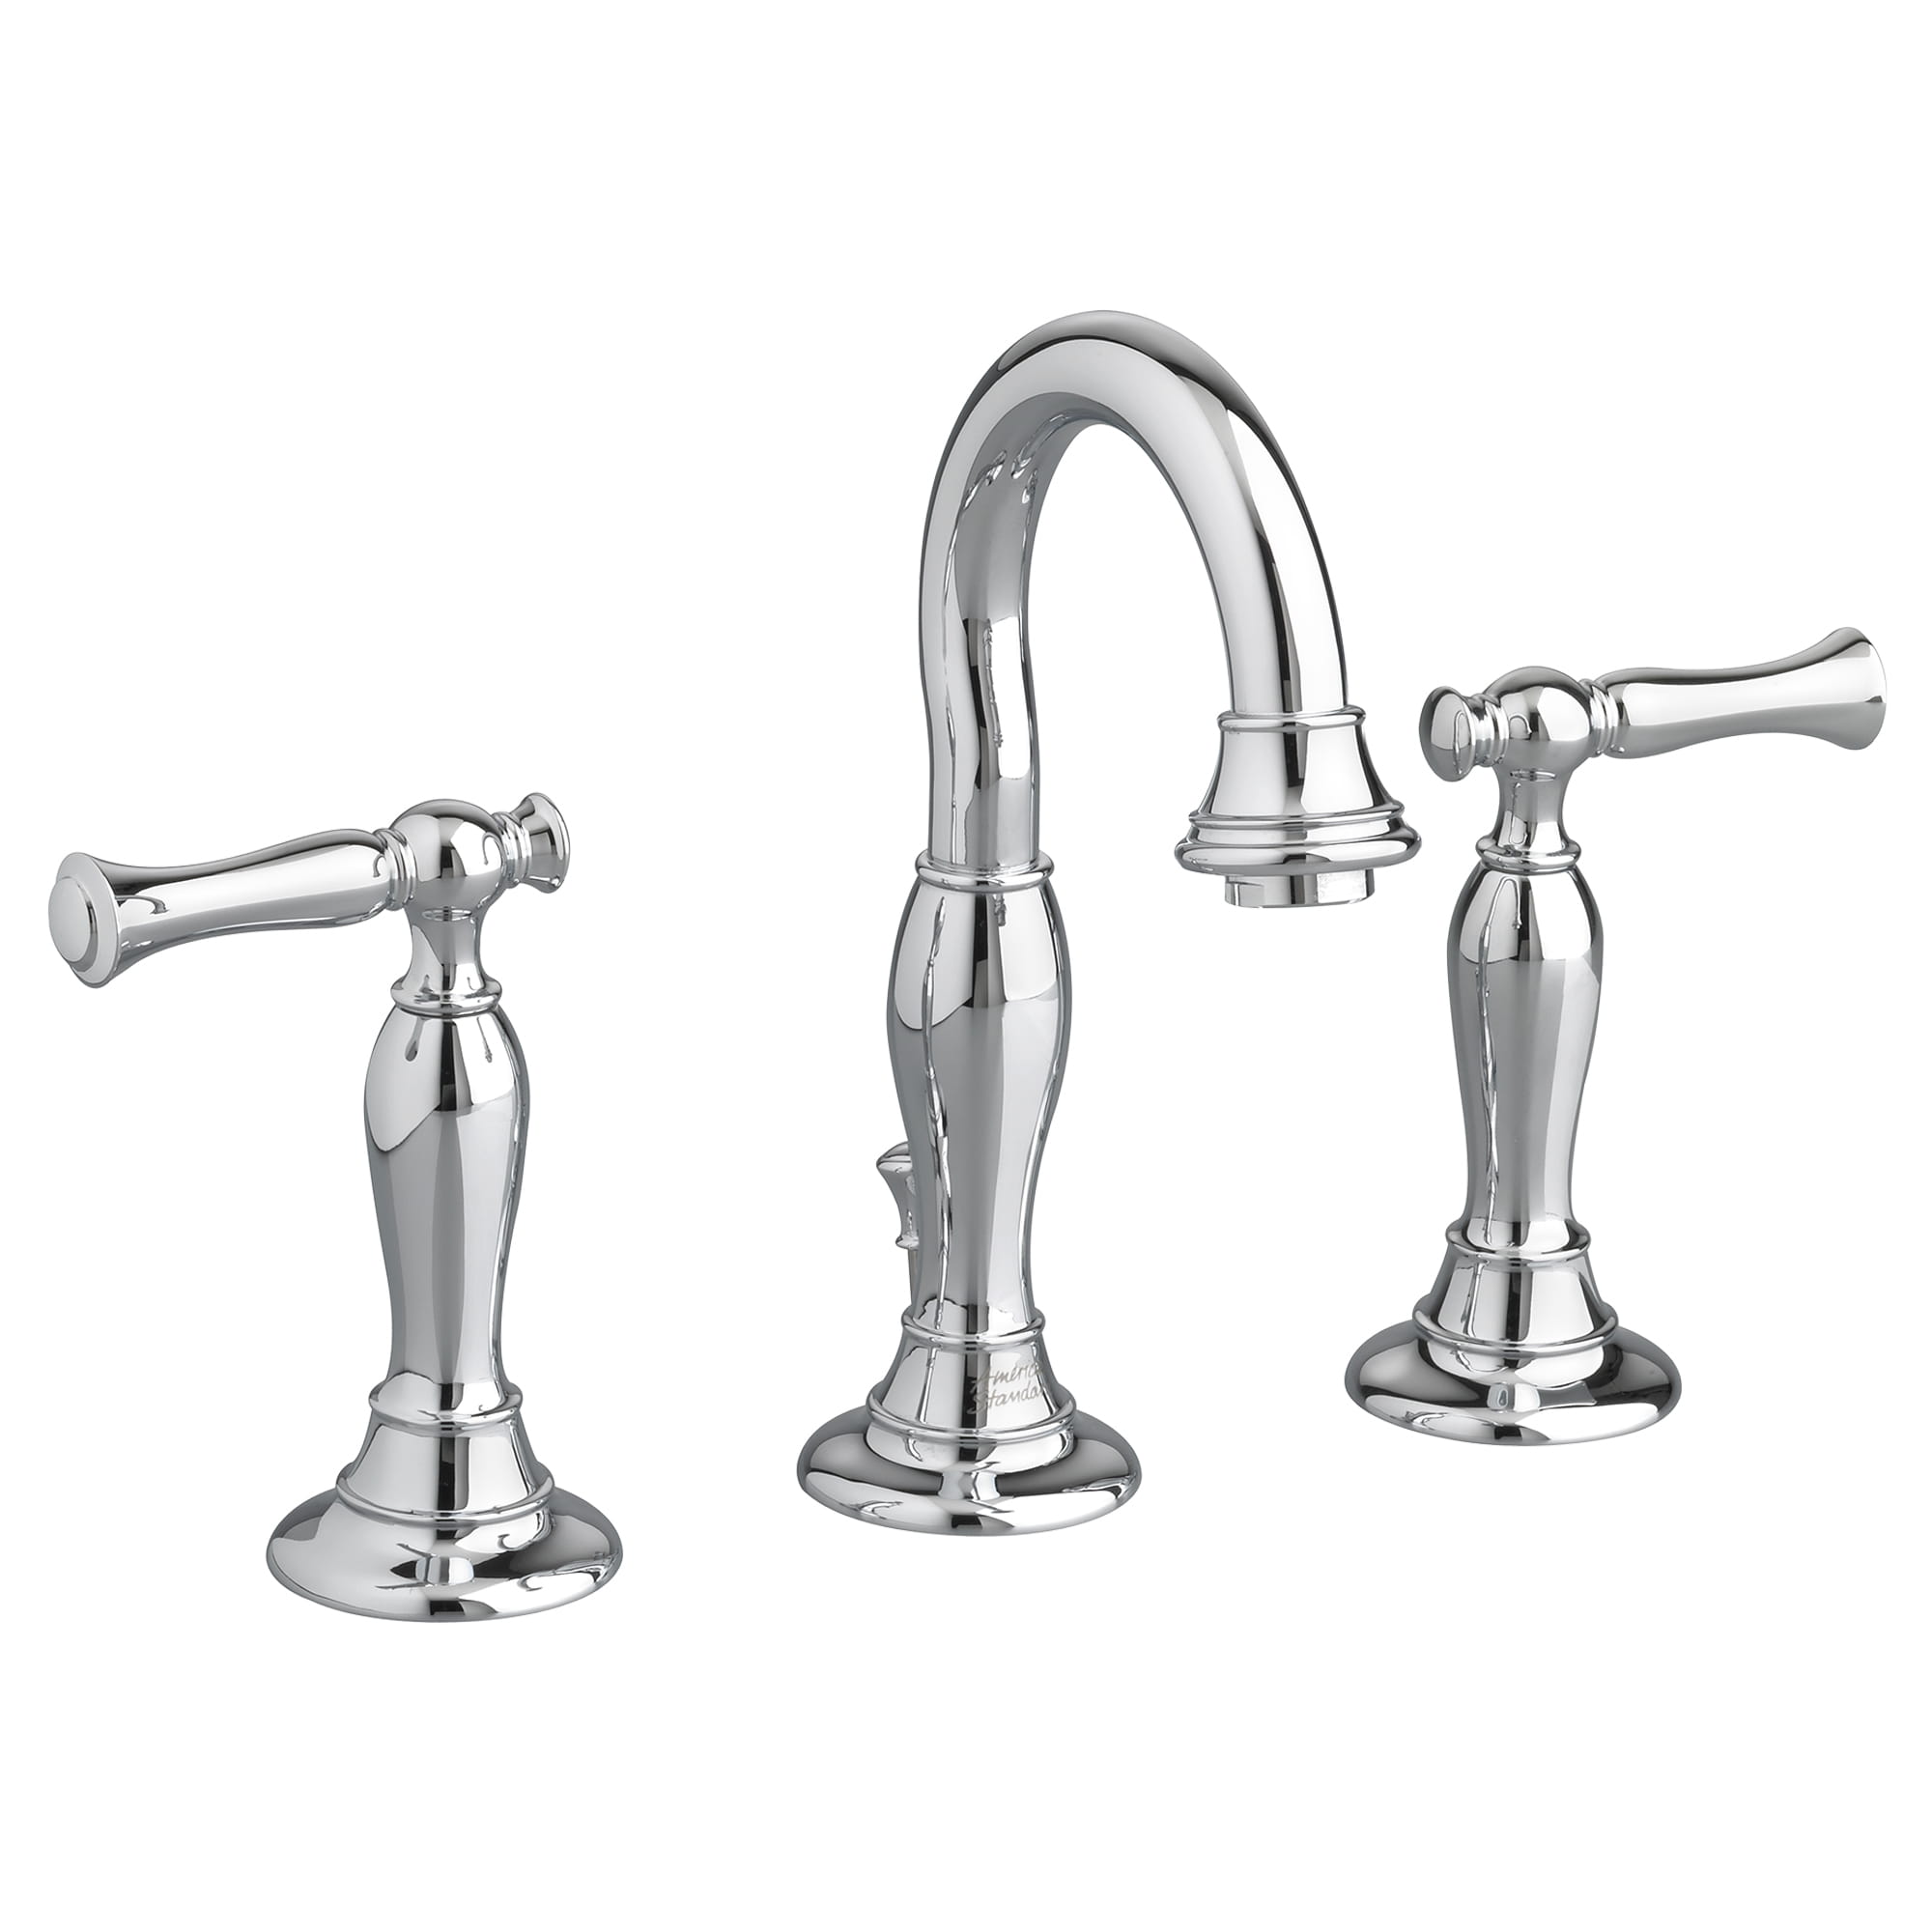 Quentin 8 Inch Widespread 2 Handle Bathroom Faucet 12 gpm 45 L min With Lever Handles CHROME